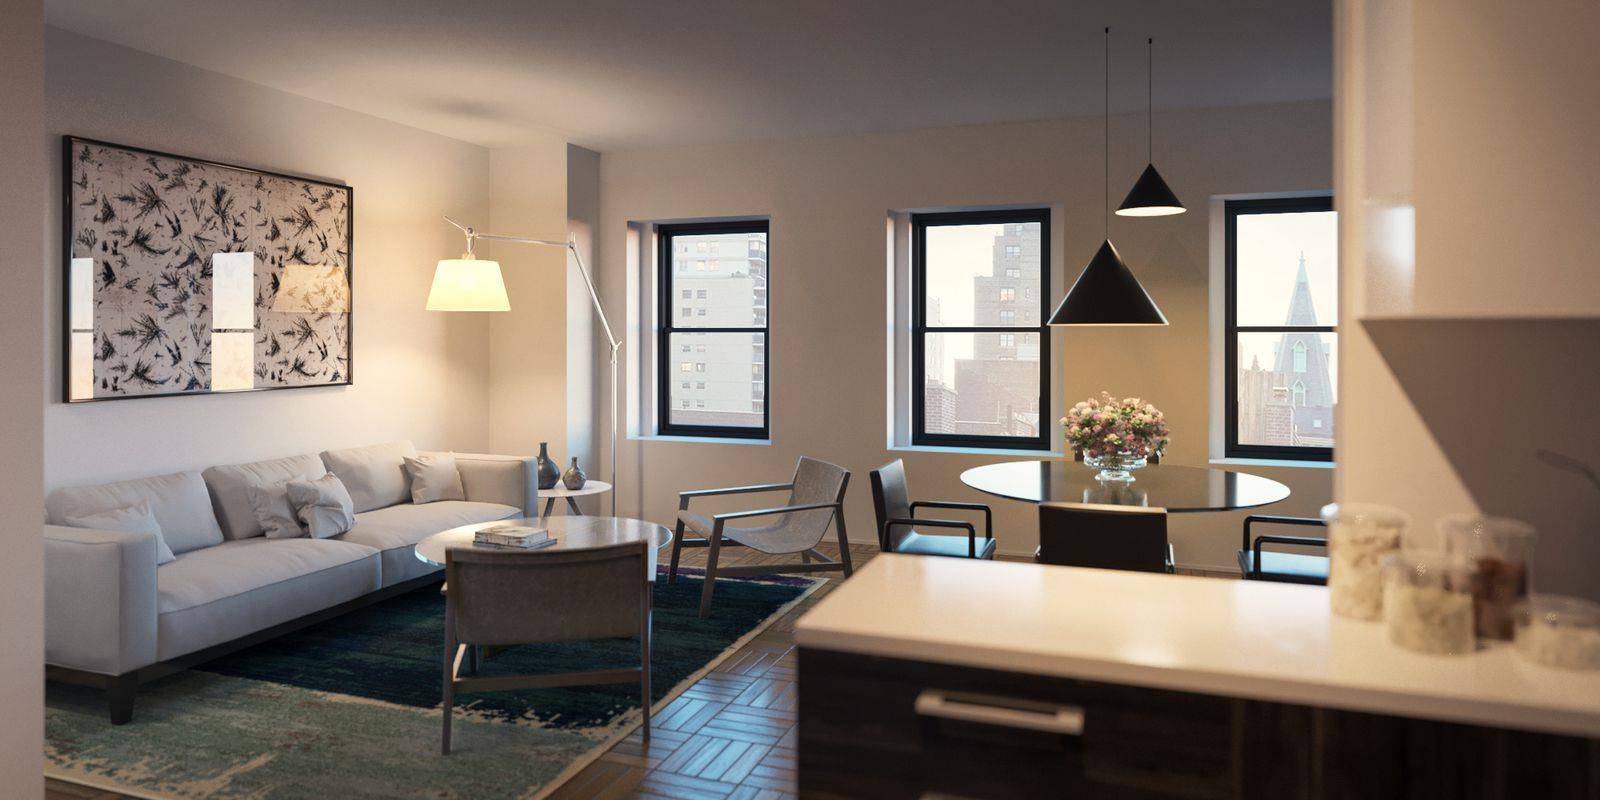 Located in Midtown West at the southern border of Hell's Kitchen, great sized apartments within walking distance to Herald Square, Times Square and many other central hubs in Manhattan.